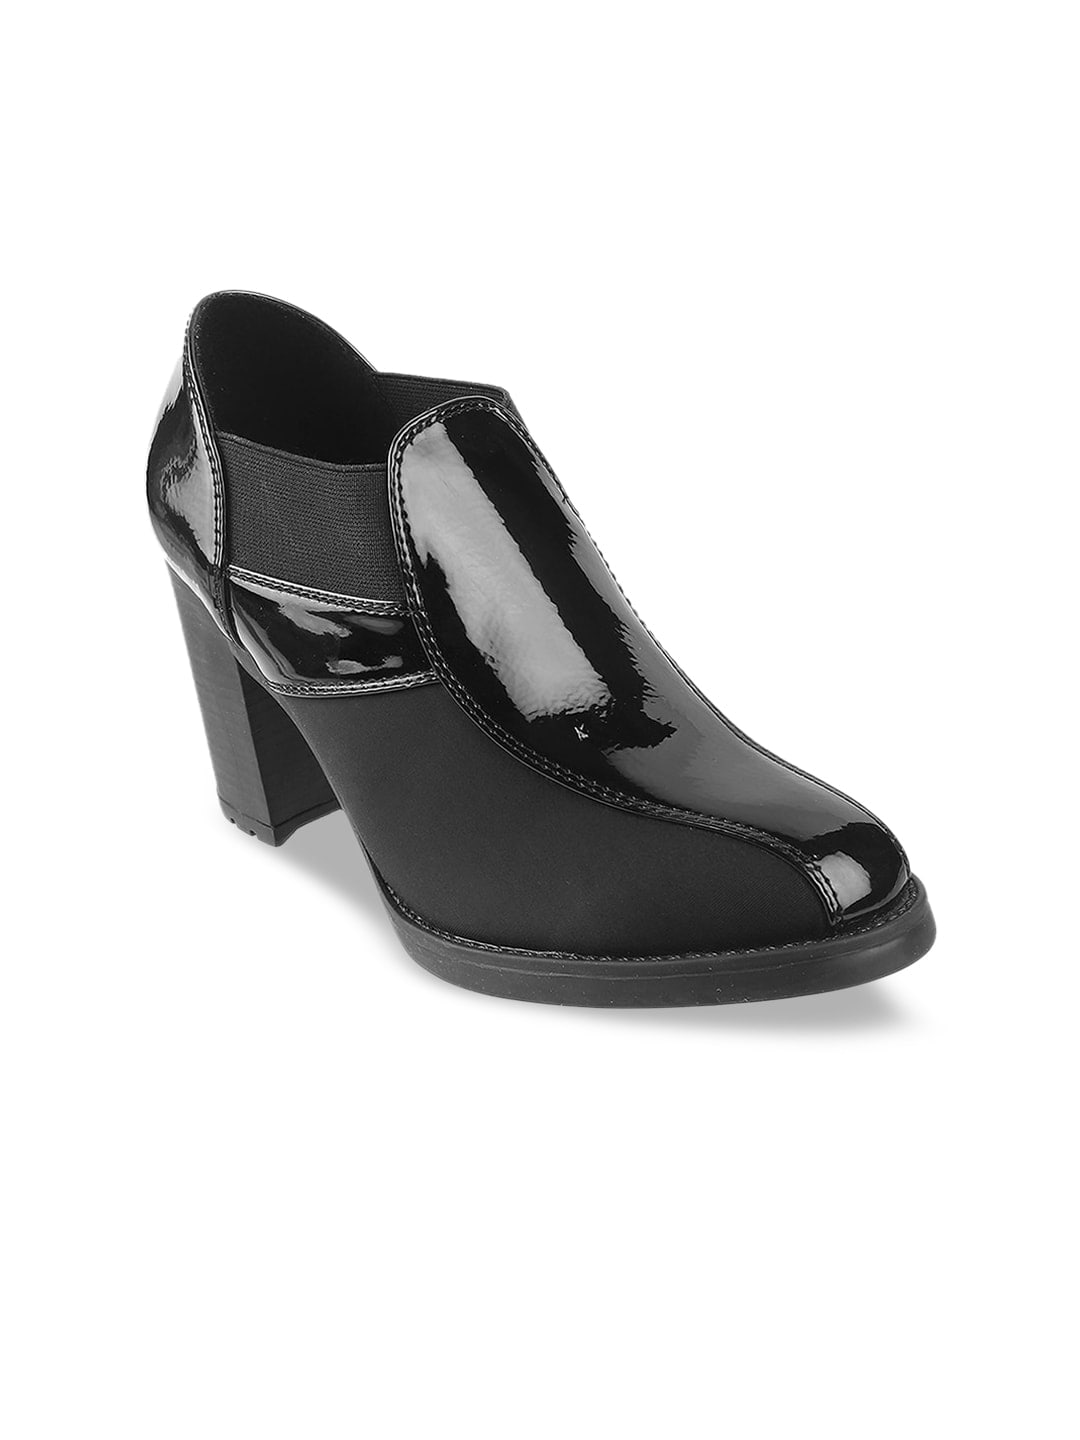 Catwalk Women Black Solid Heeled Boots Price in India